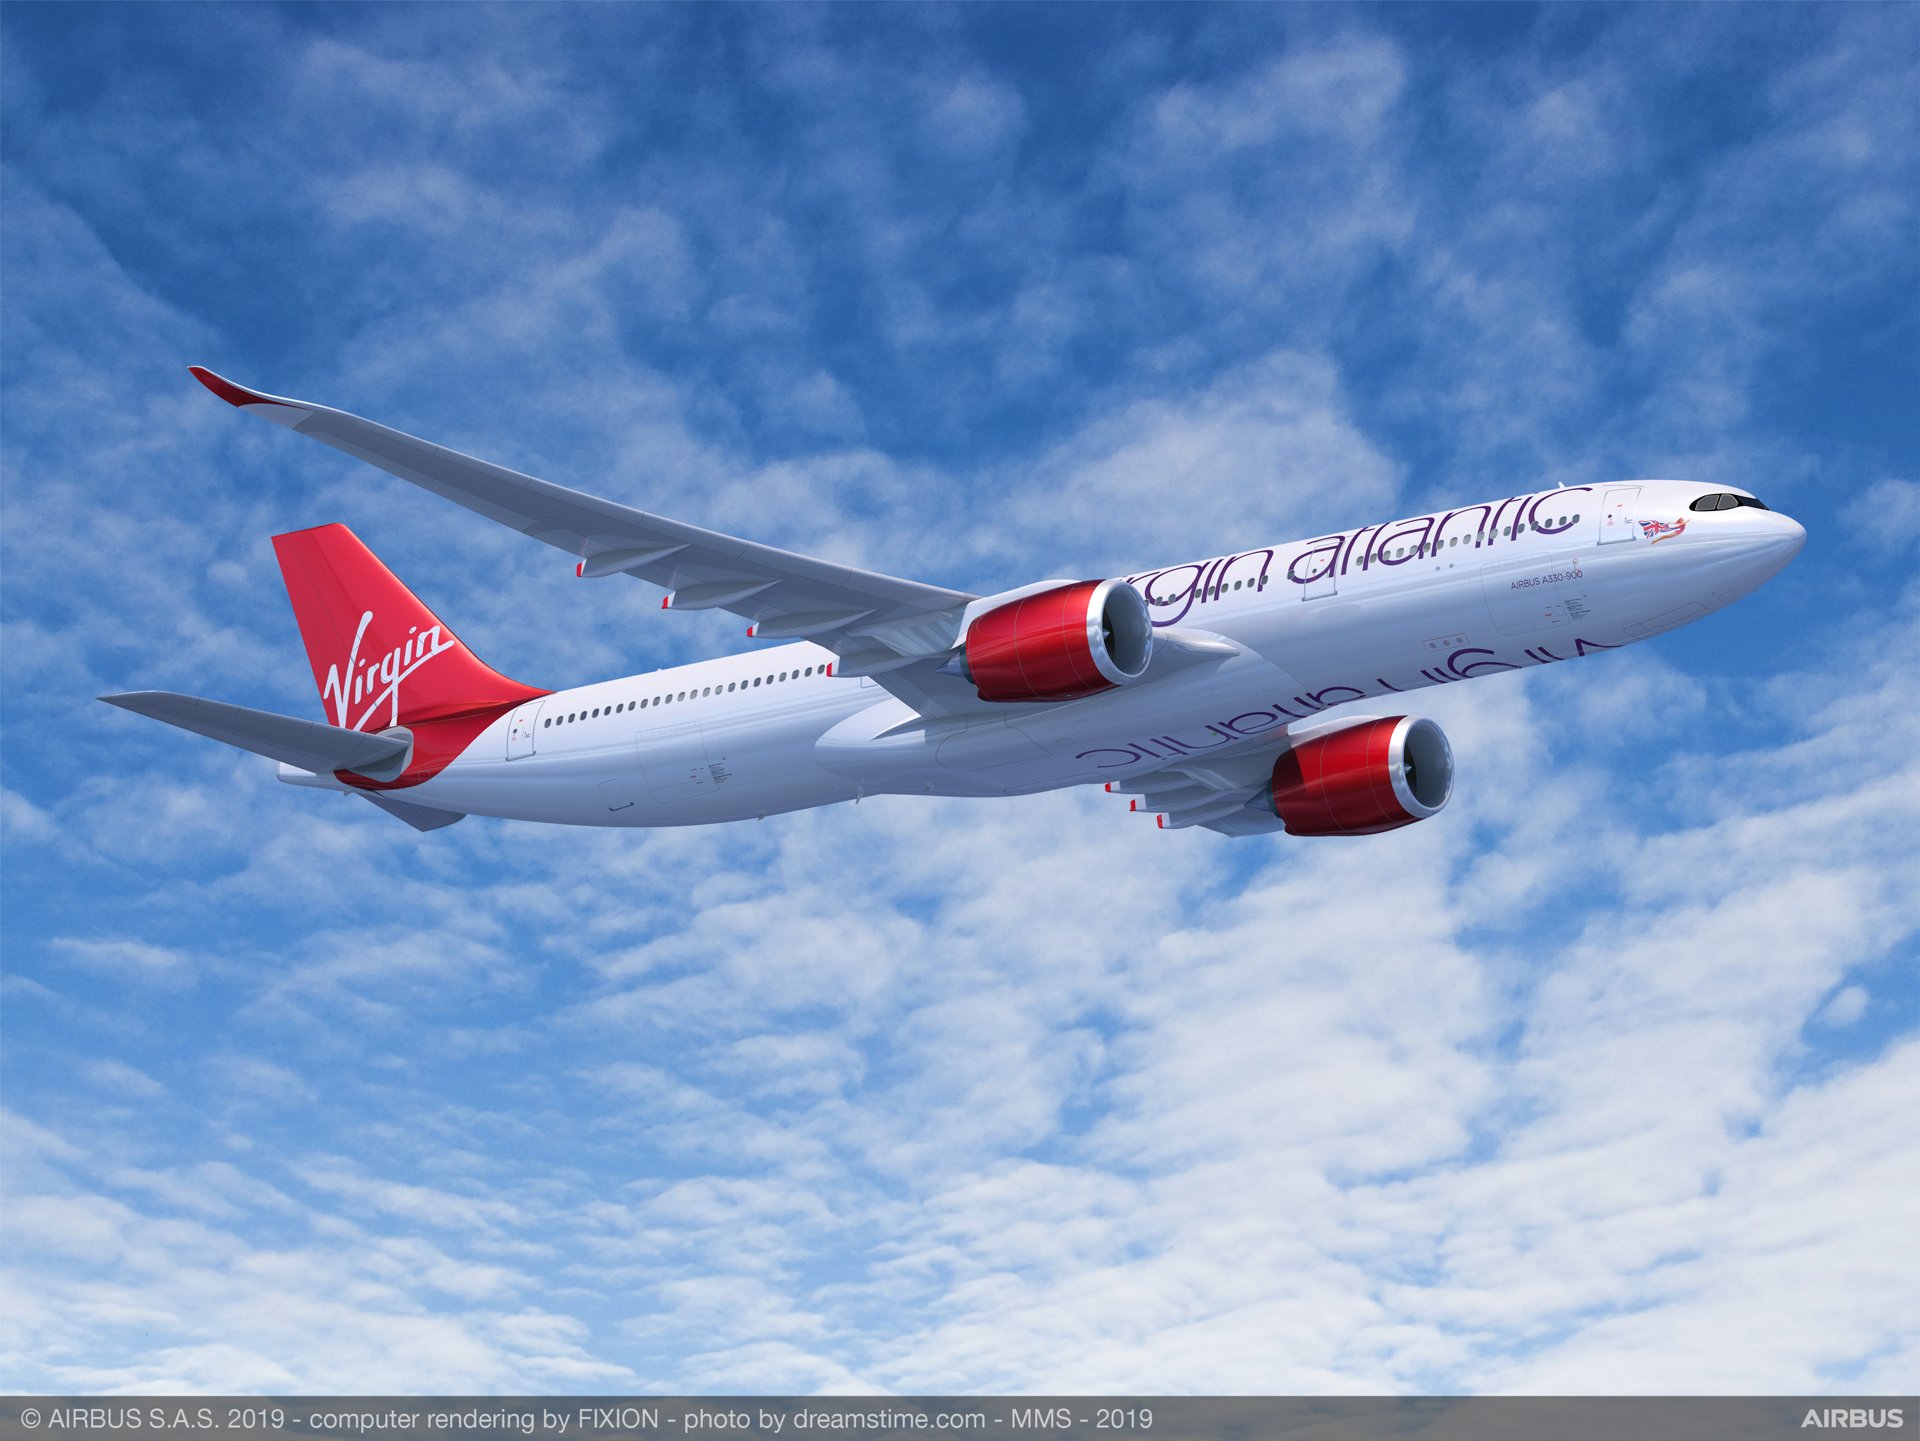 Virgin Atlantic Selects A330neo For Its Fleet Renewal And